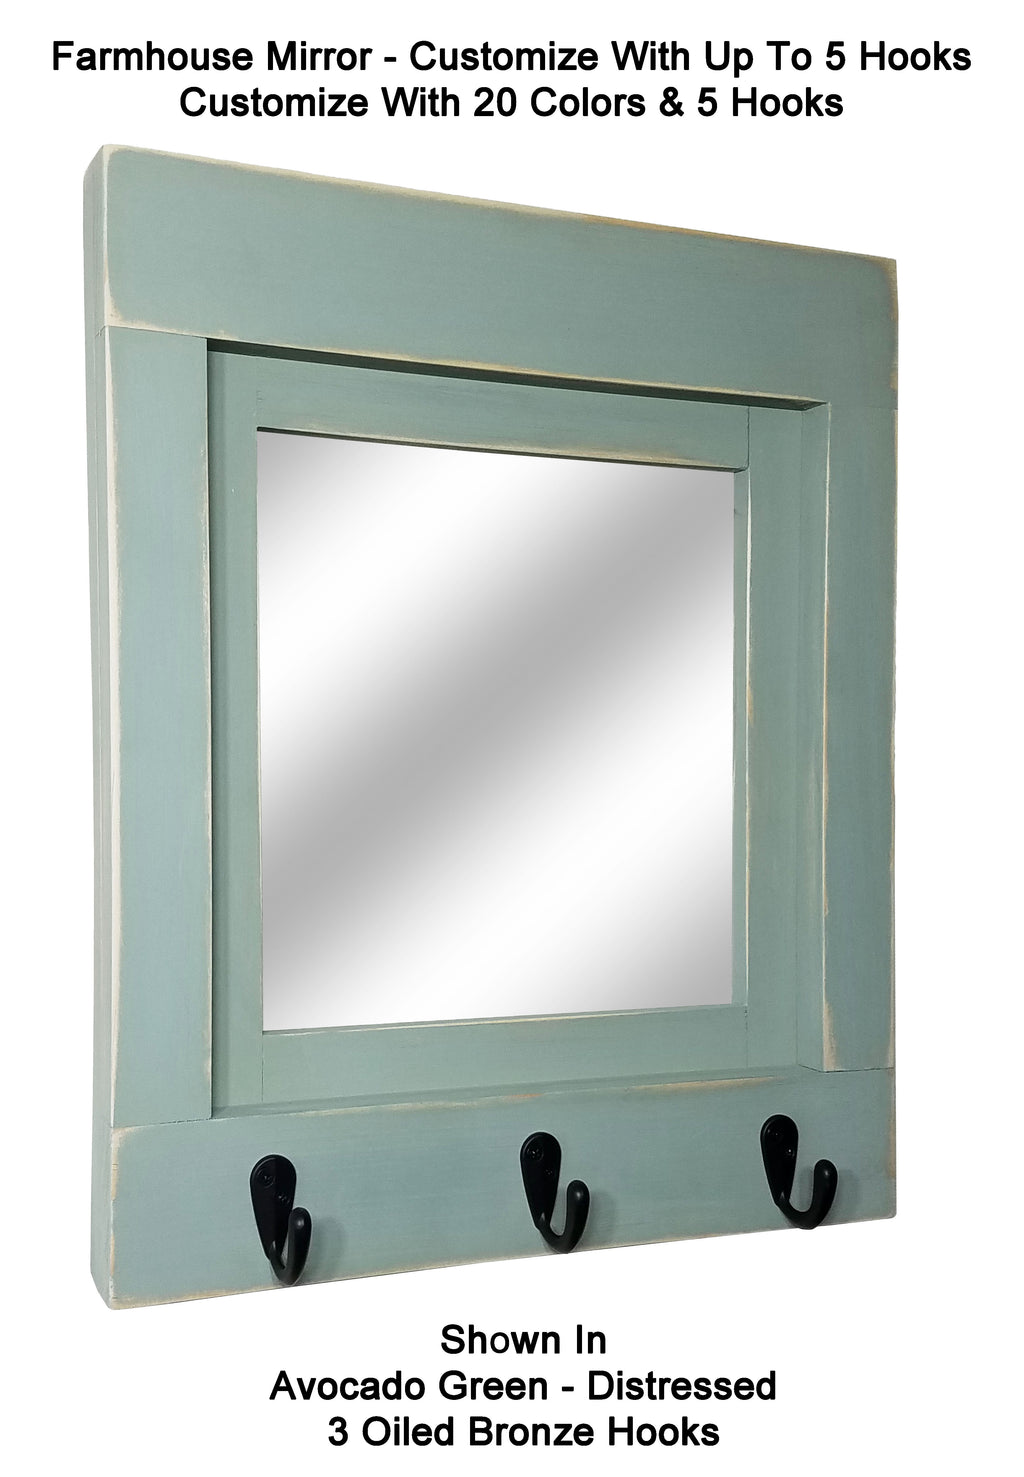 Oxford Decorative Mirror with Shelf & Hooks, Handmade in the USA